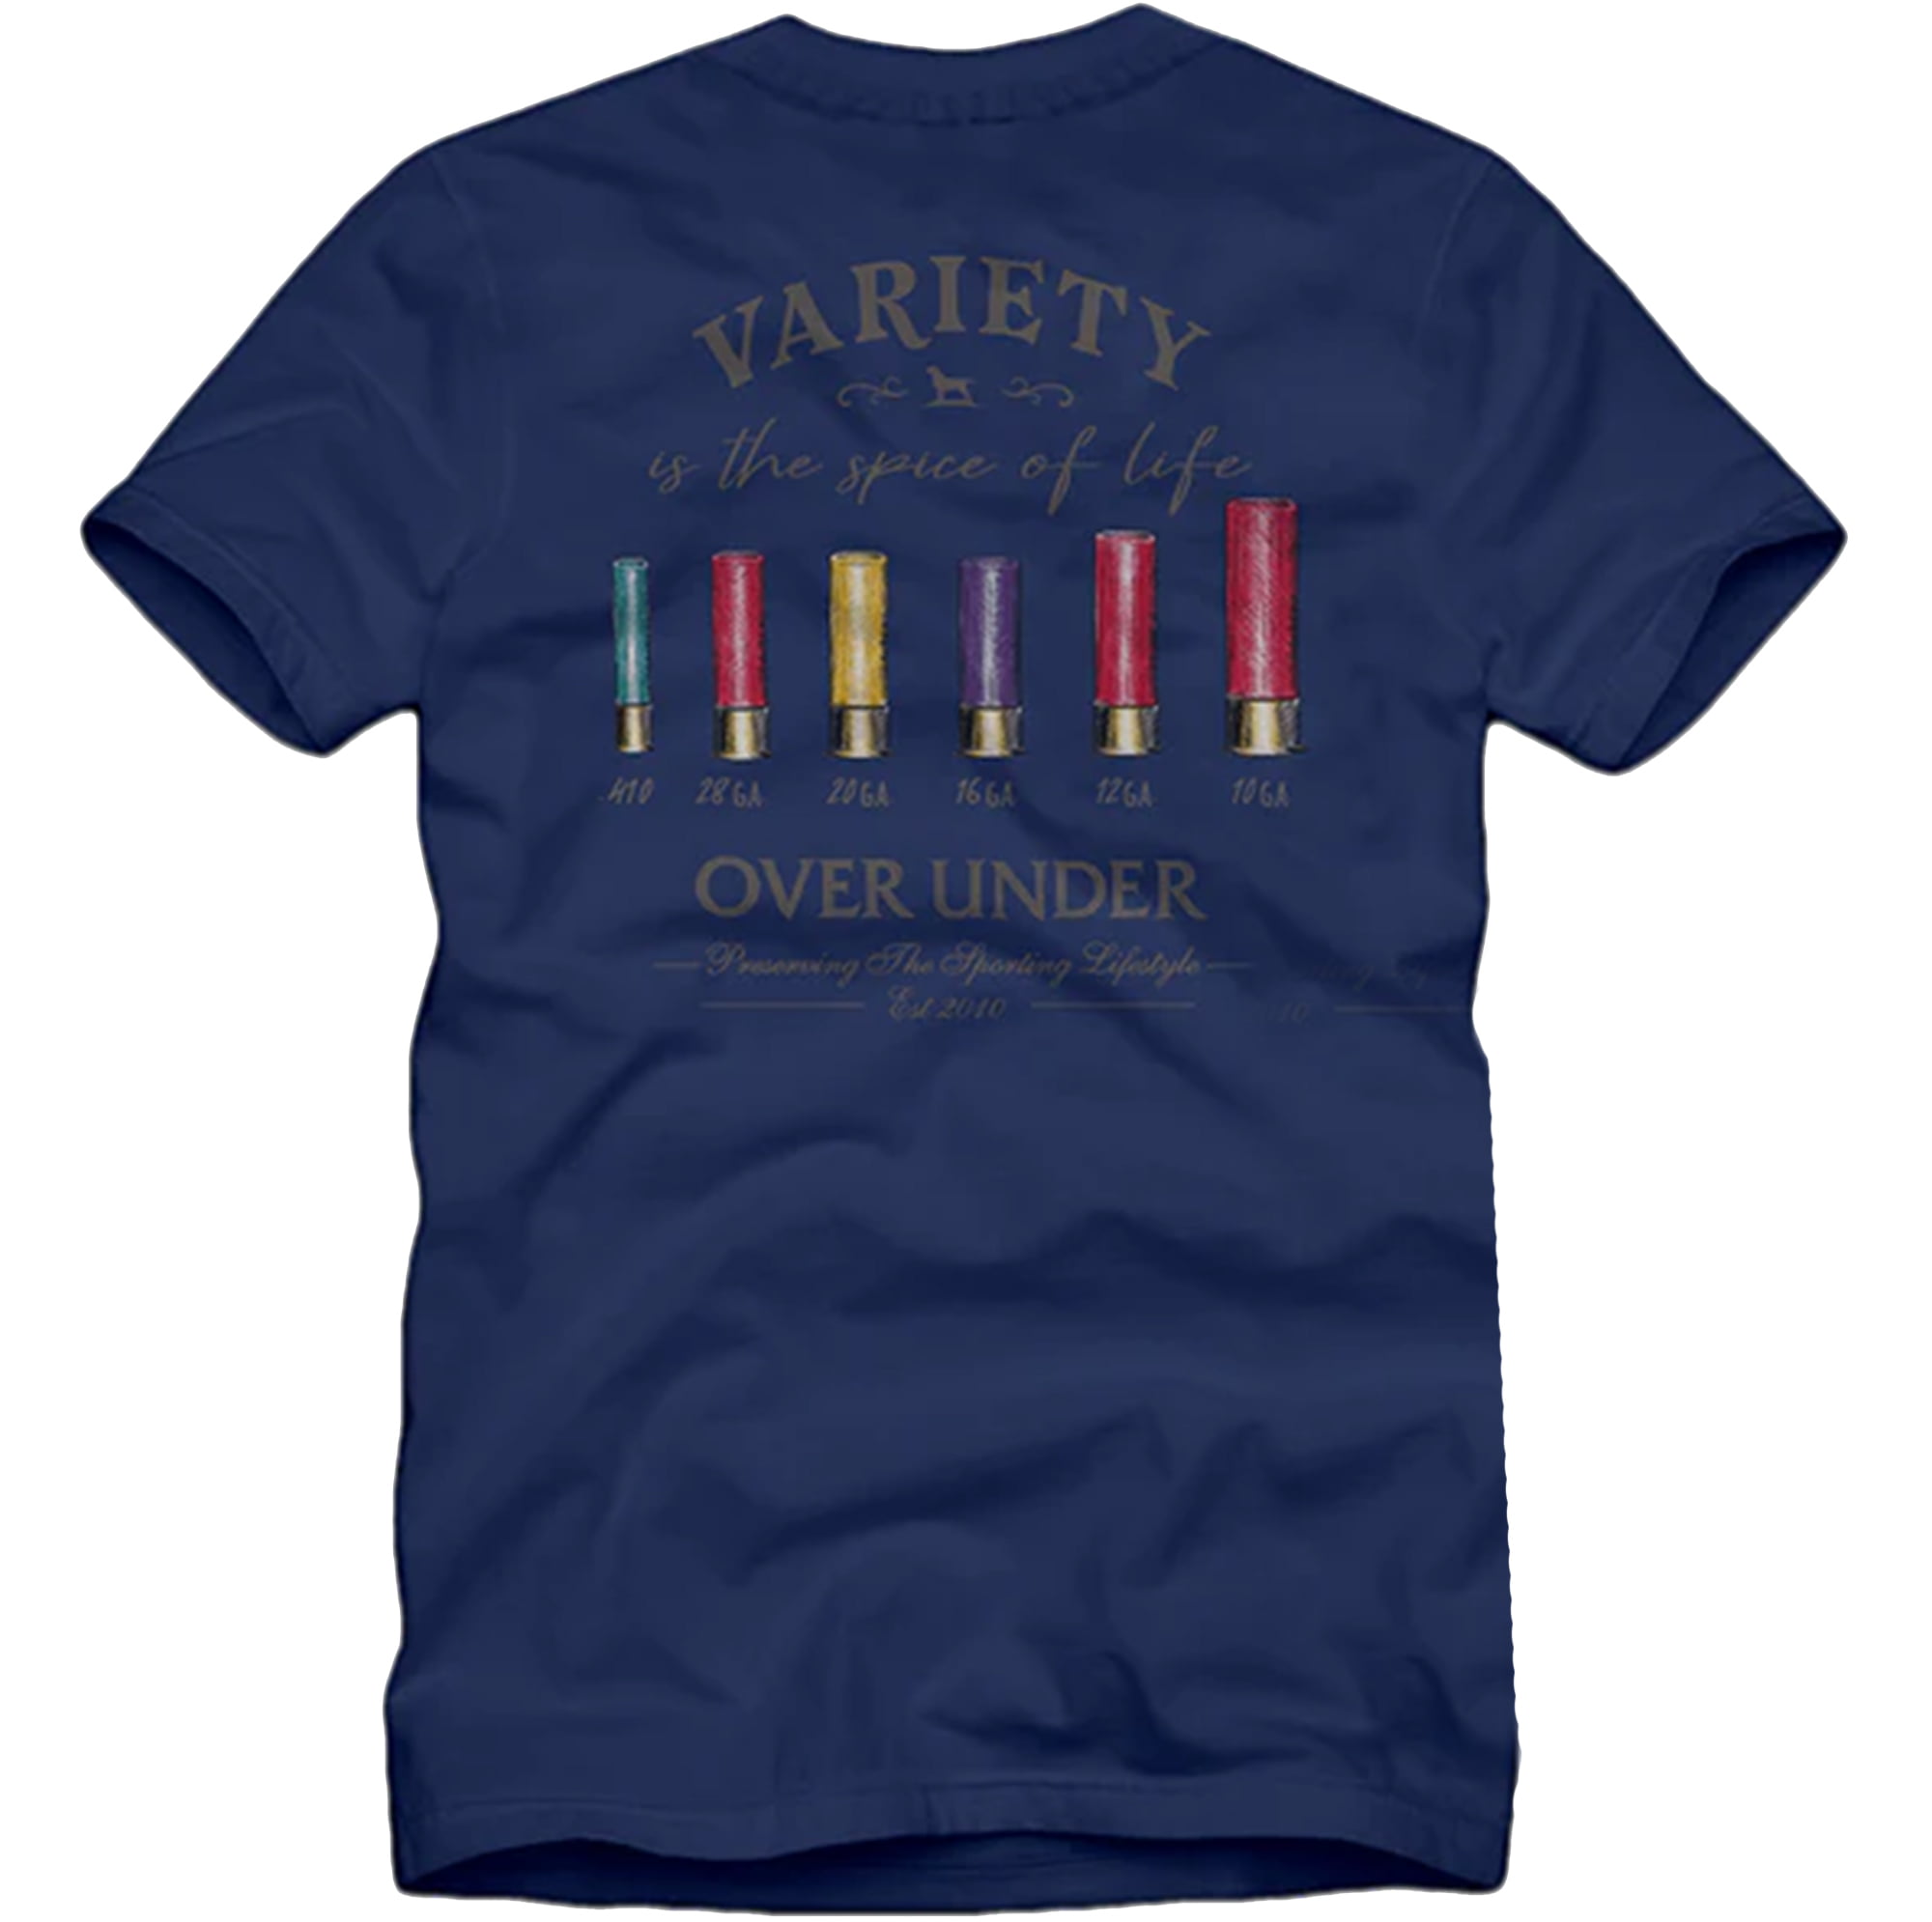 Over Under Clothing Variety is the Spice of Life Adult Unisex